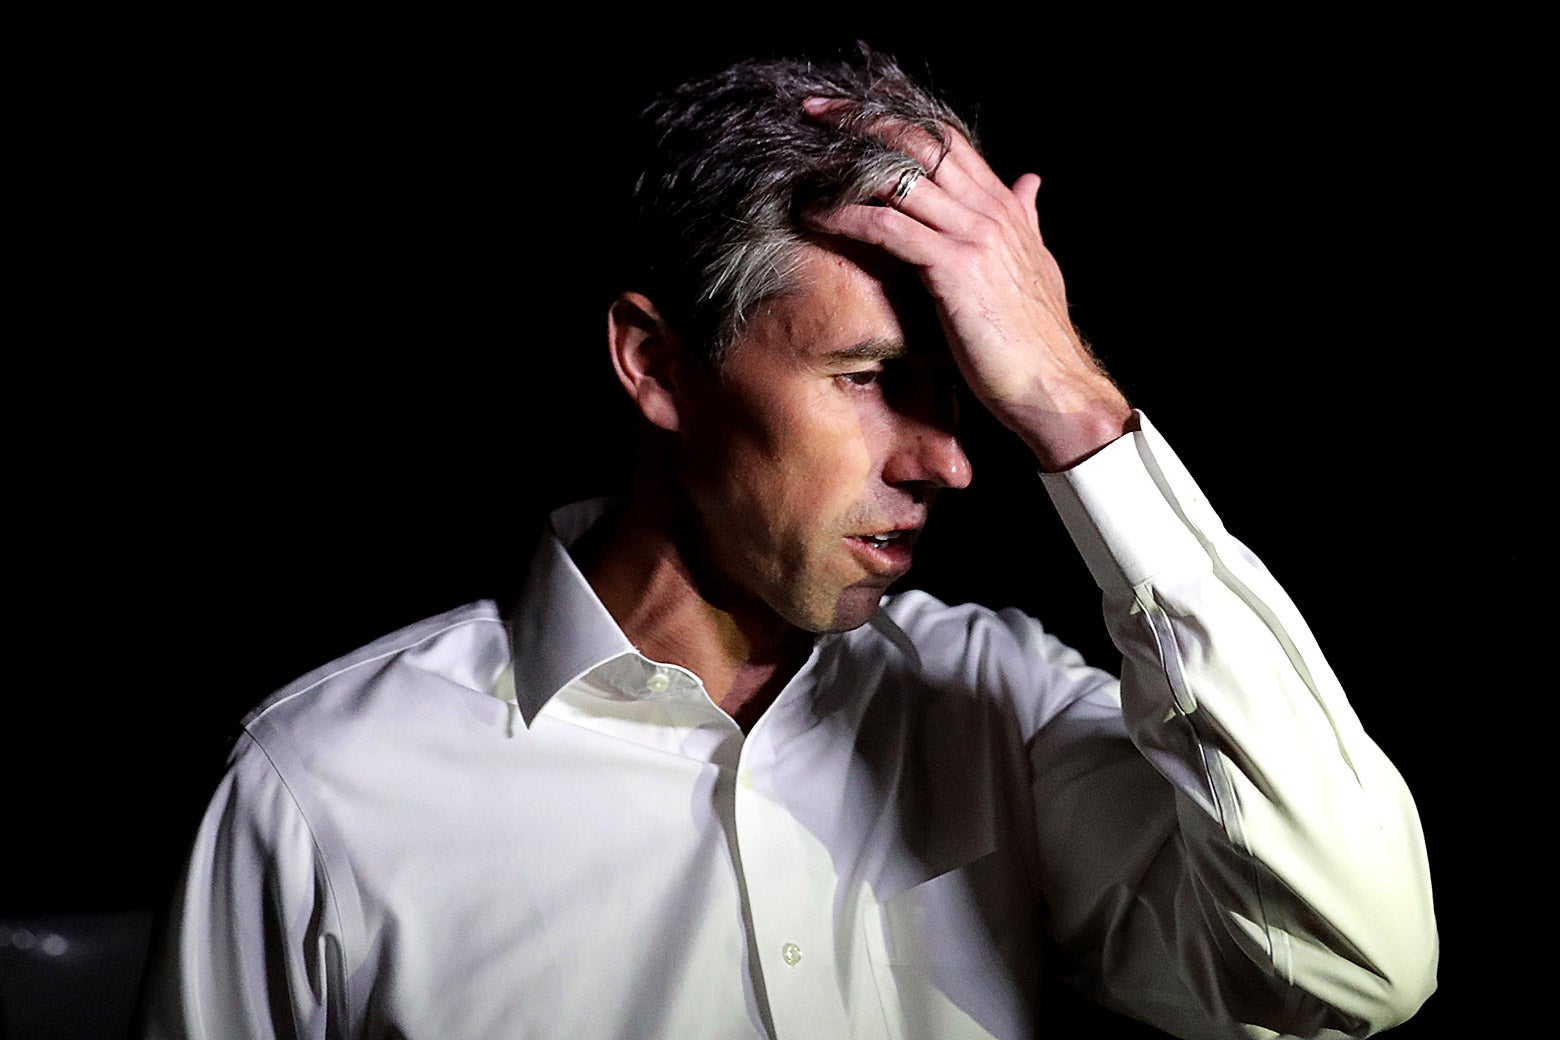 Beto O'Rourke holds a hand to his forehead while he talks with reporters after a day of door-to-door canvassing on Nov. 3 in Dallas.